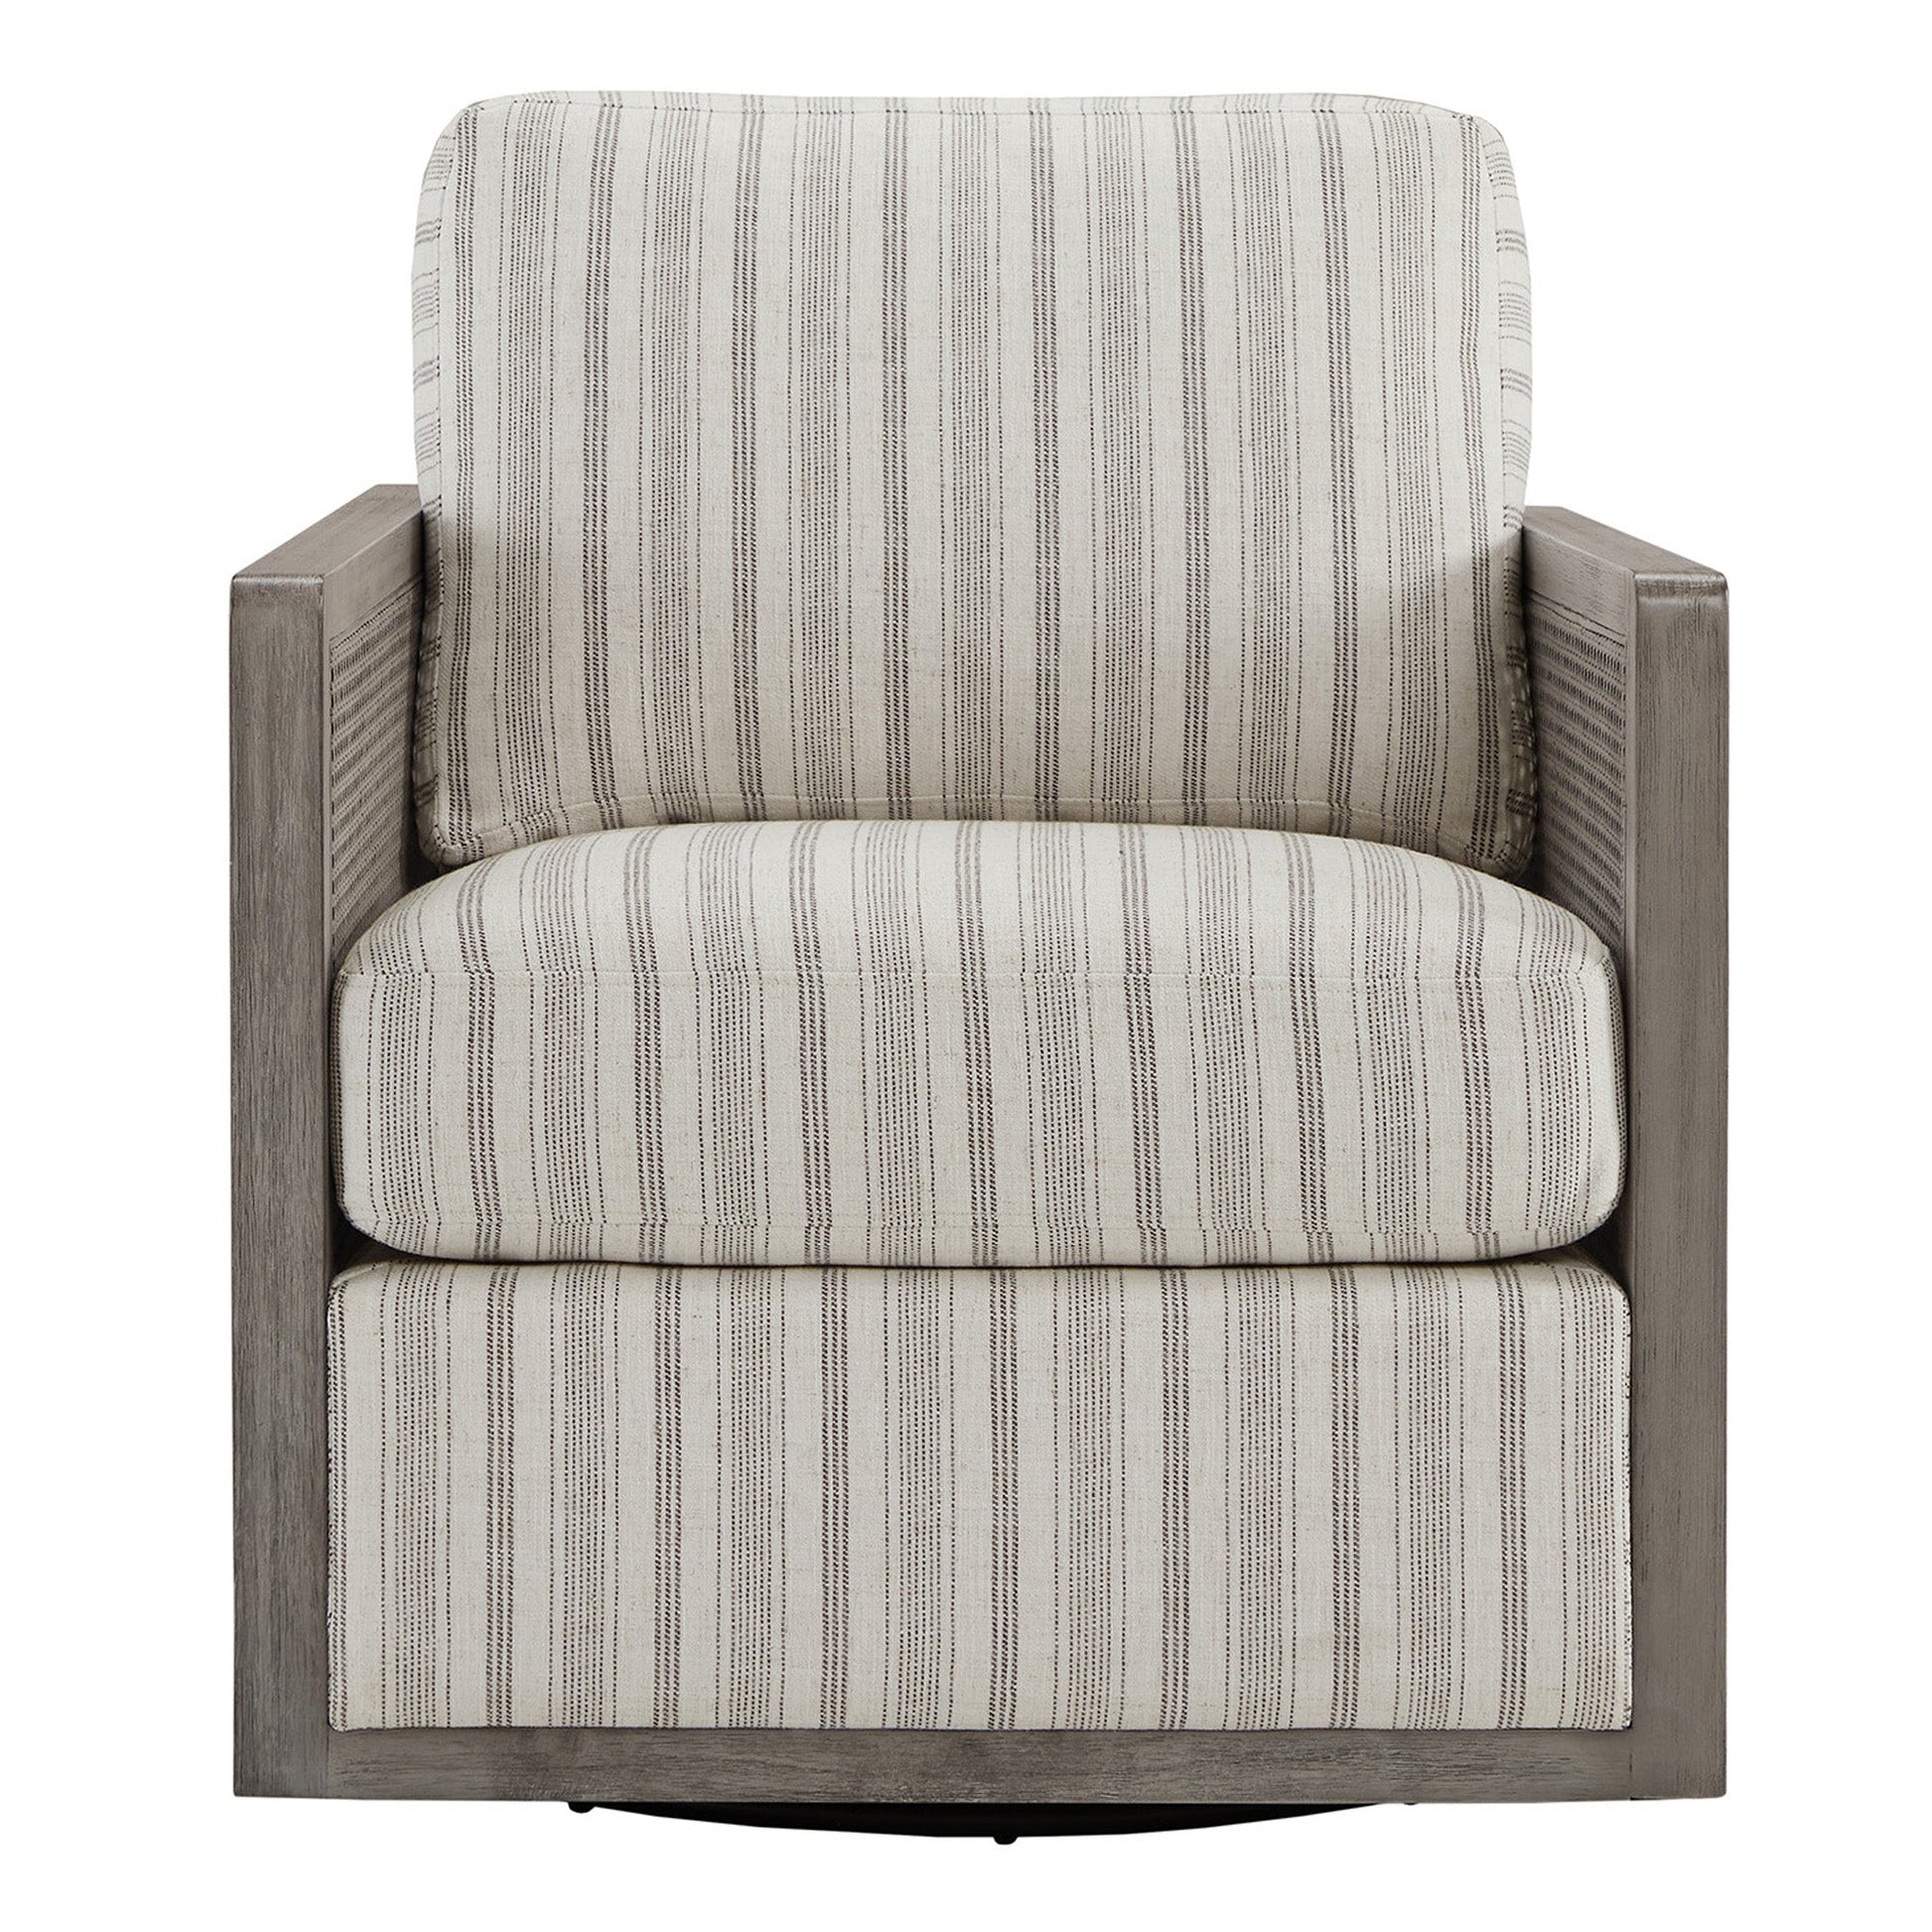 CHITA LIVING-Milly Classic Cane Swivel Armchair-Accent Chair-Gray-Gray-